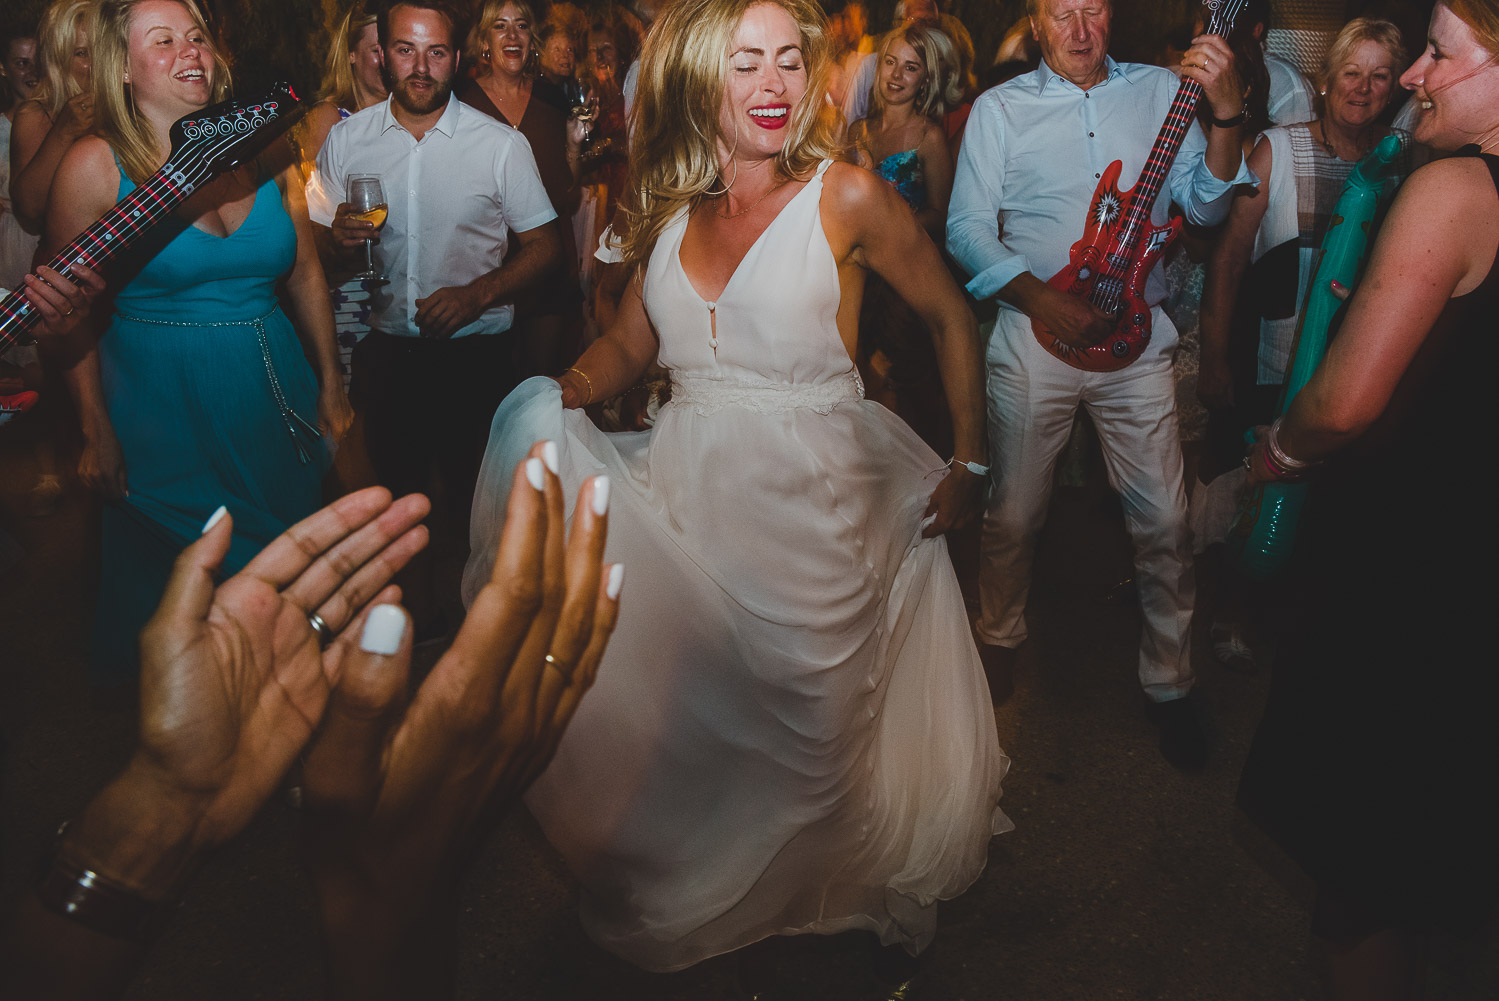 Wedding photographer Mykonos: bride on the dance floor surrounded by inflatable guitar at Elia during Mykonos wedding.